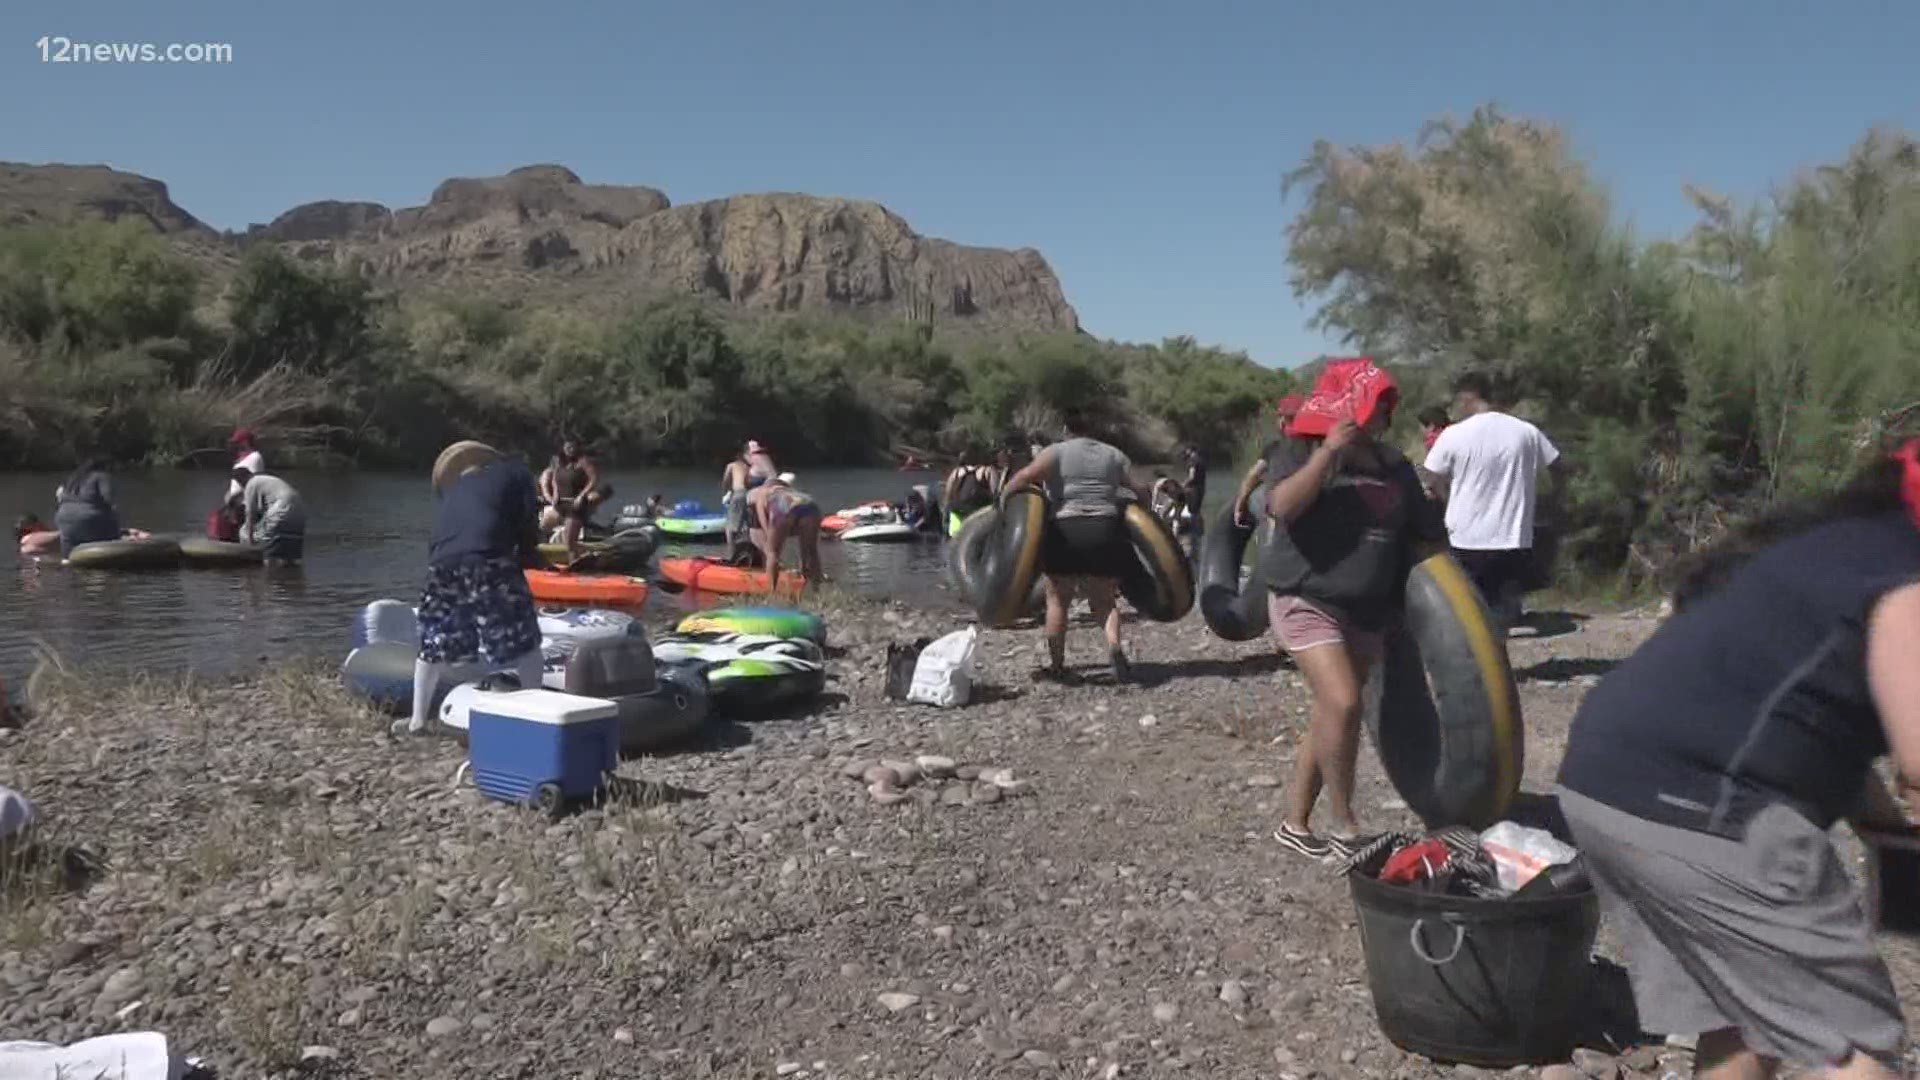 The Salt River Tubing opening was delayed due to coronavirus closures, and now the company is adding new safety measures for people hitting the water.